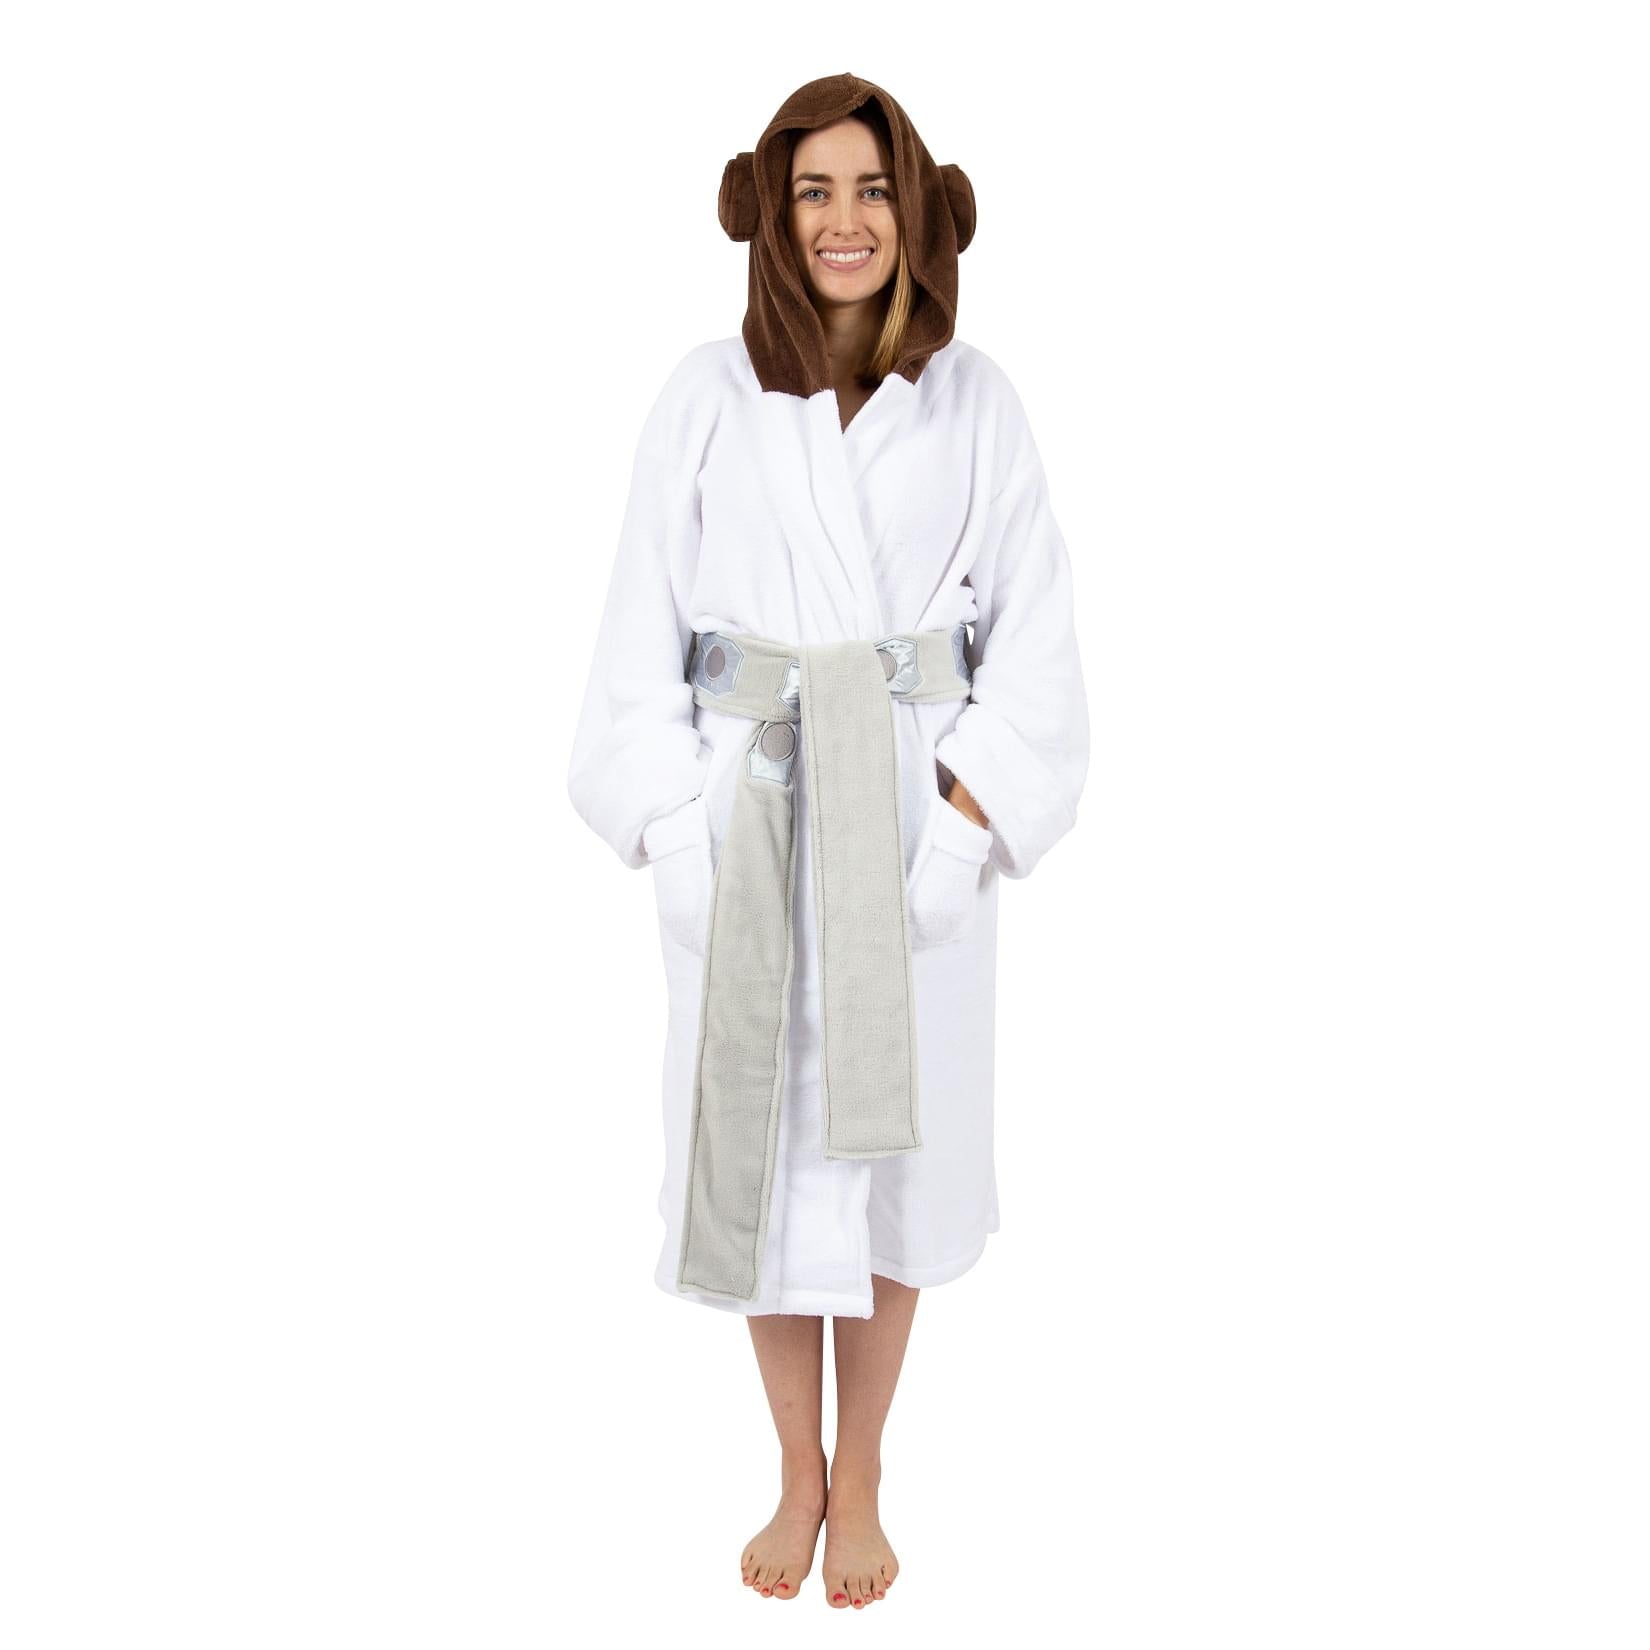 Star Wars Princess Leia Unisex Hooded Bathrobe For Adults , One Size Fits Most